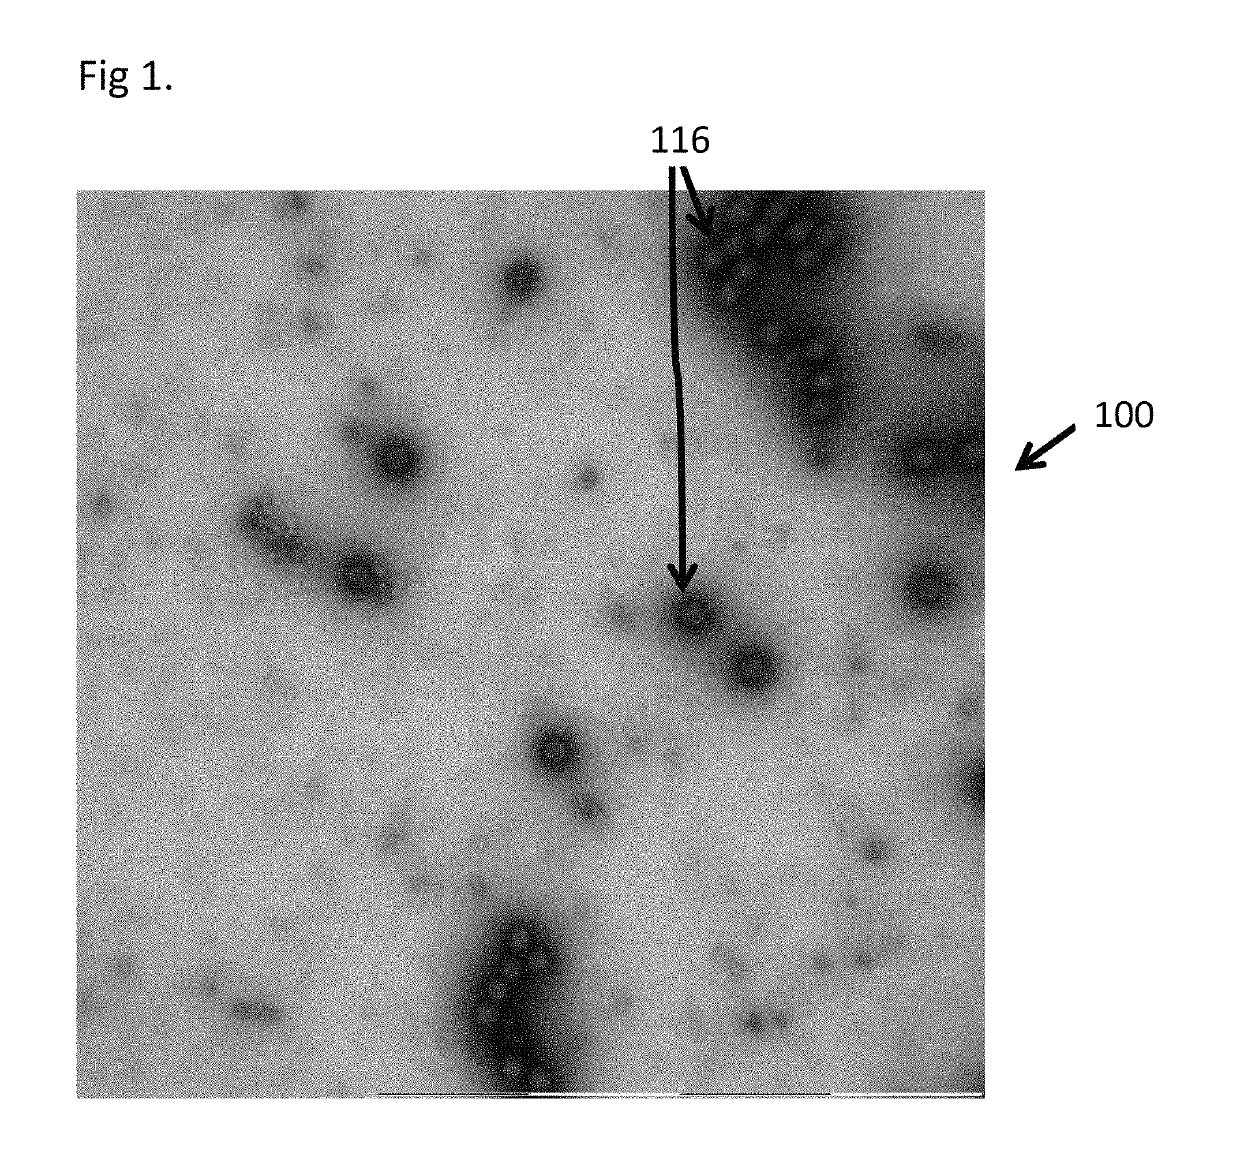 Method for quantification of purity of sub-visible particle samples